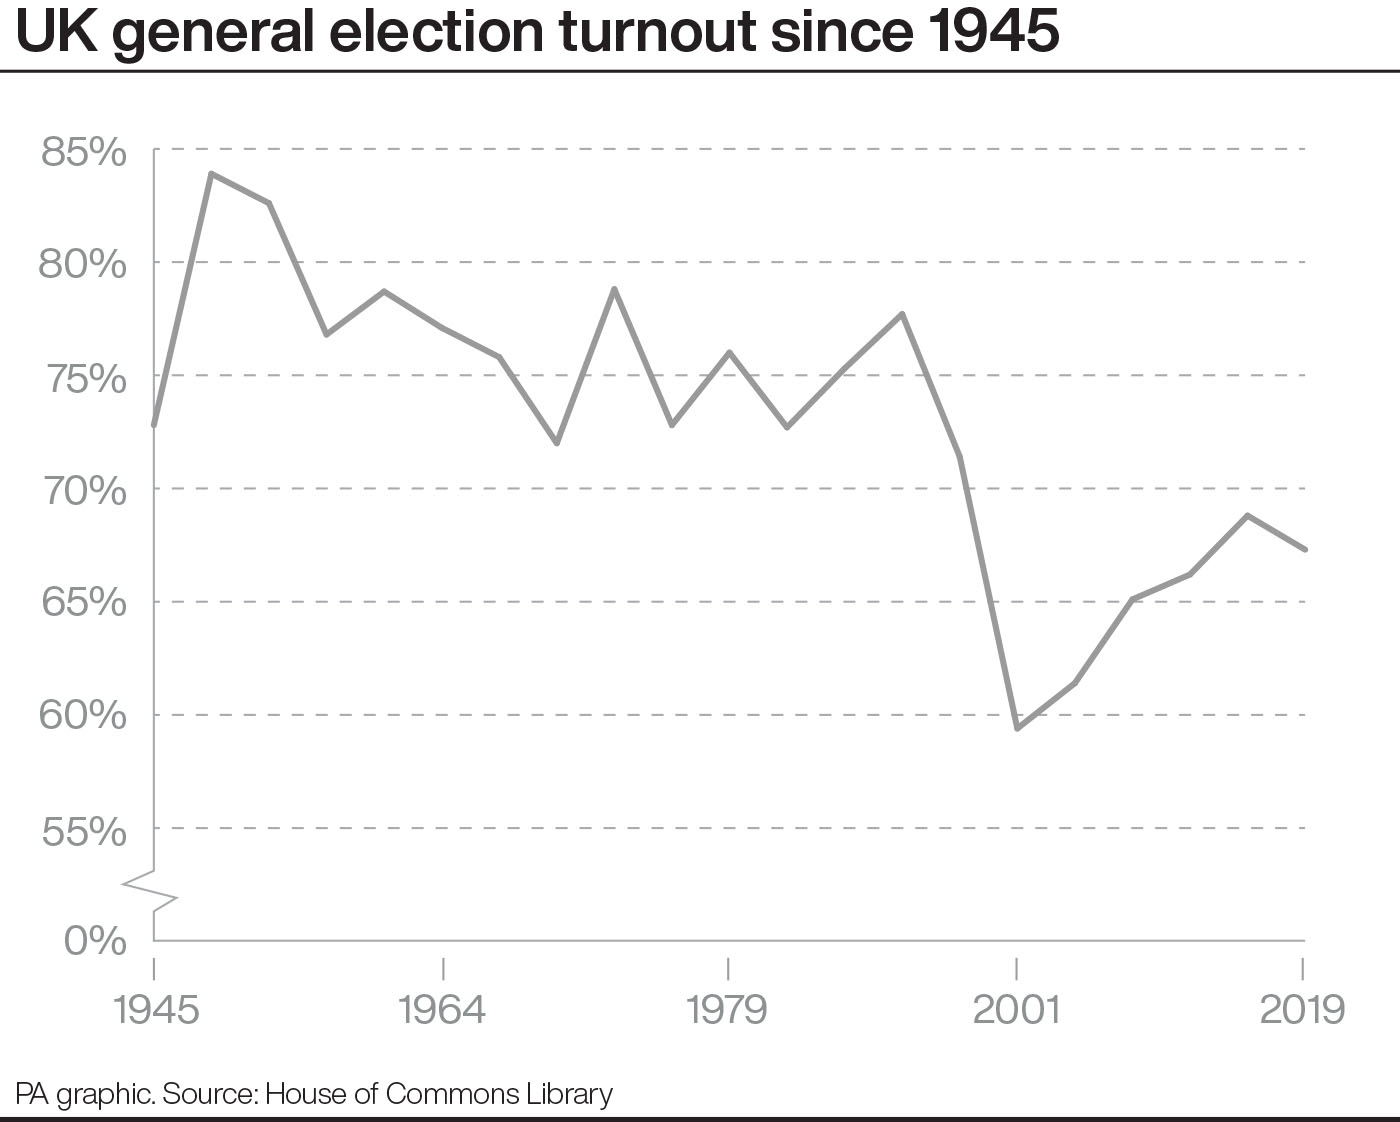 A line graph showing turnout at UK general elections since 1945